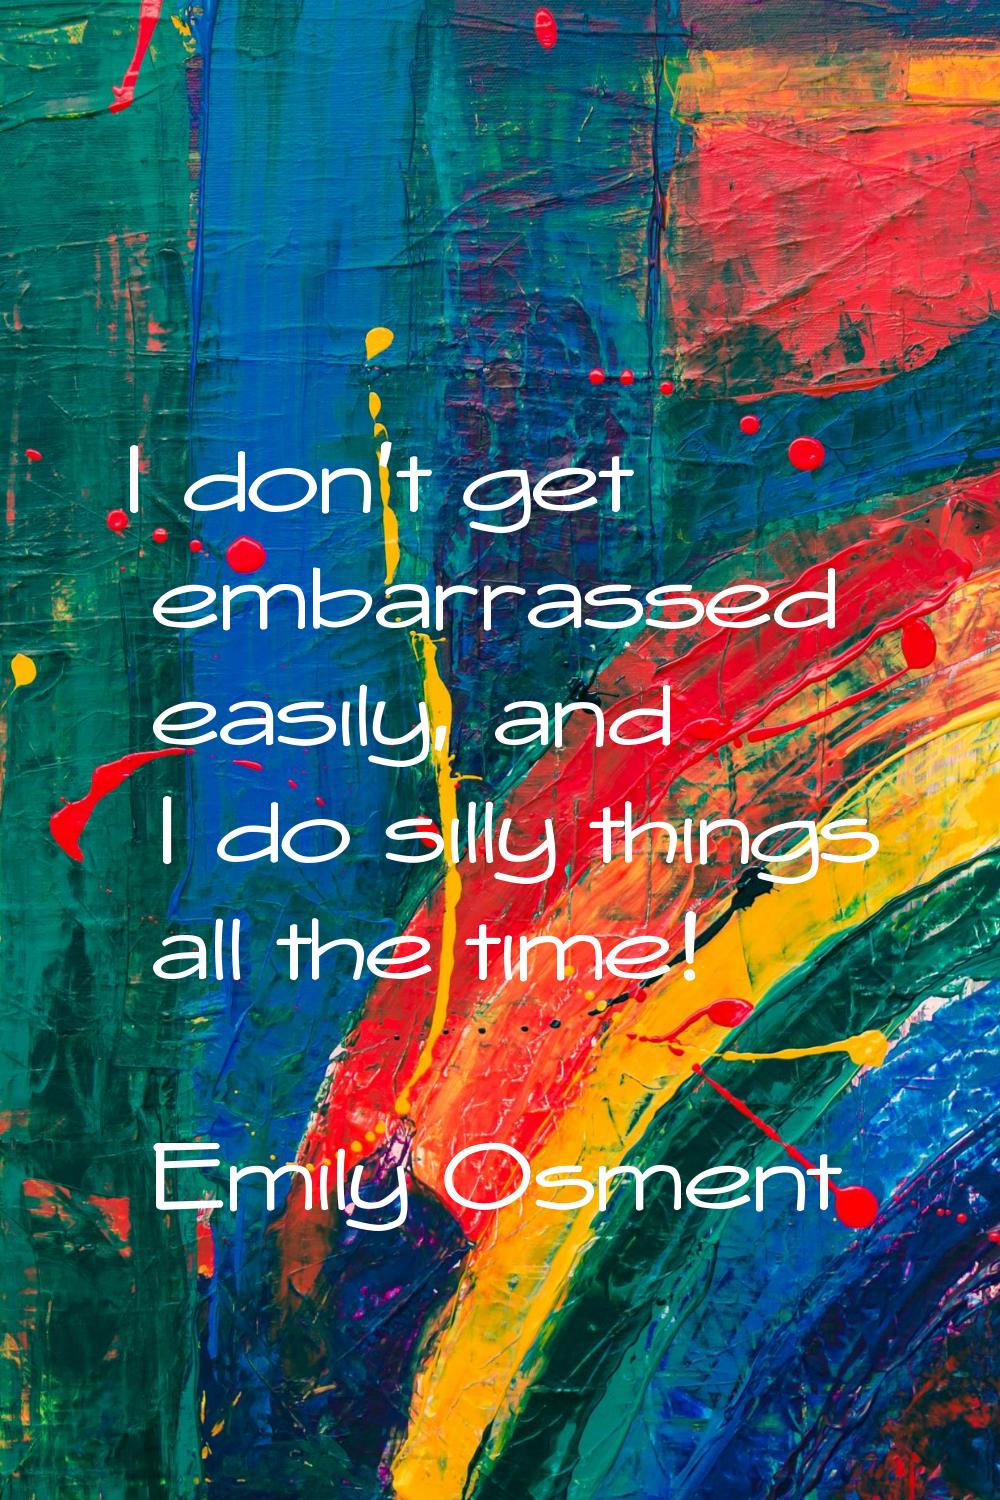 I don't get embarrassed easily, and I do silly things all the time!